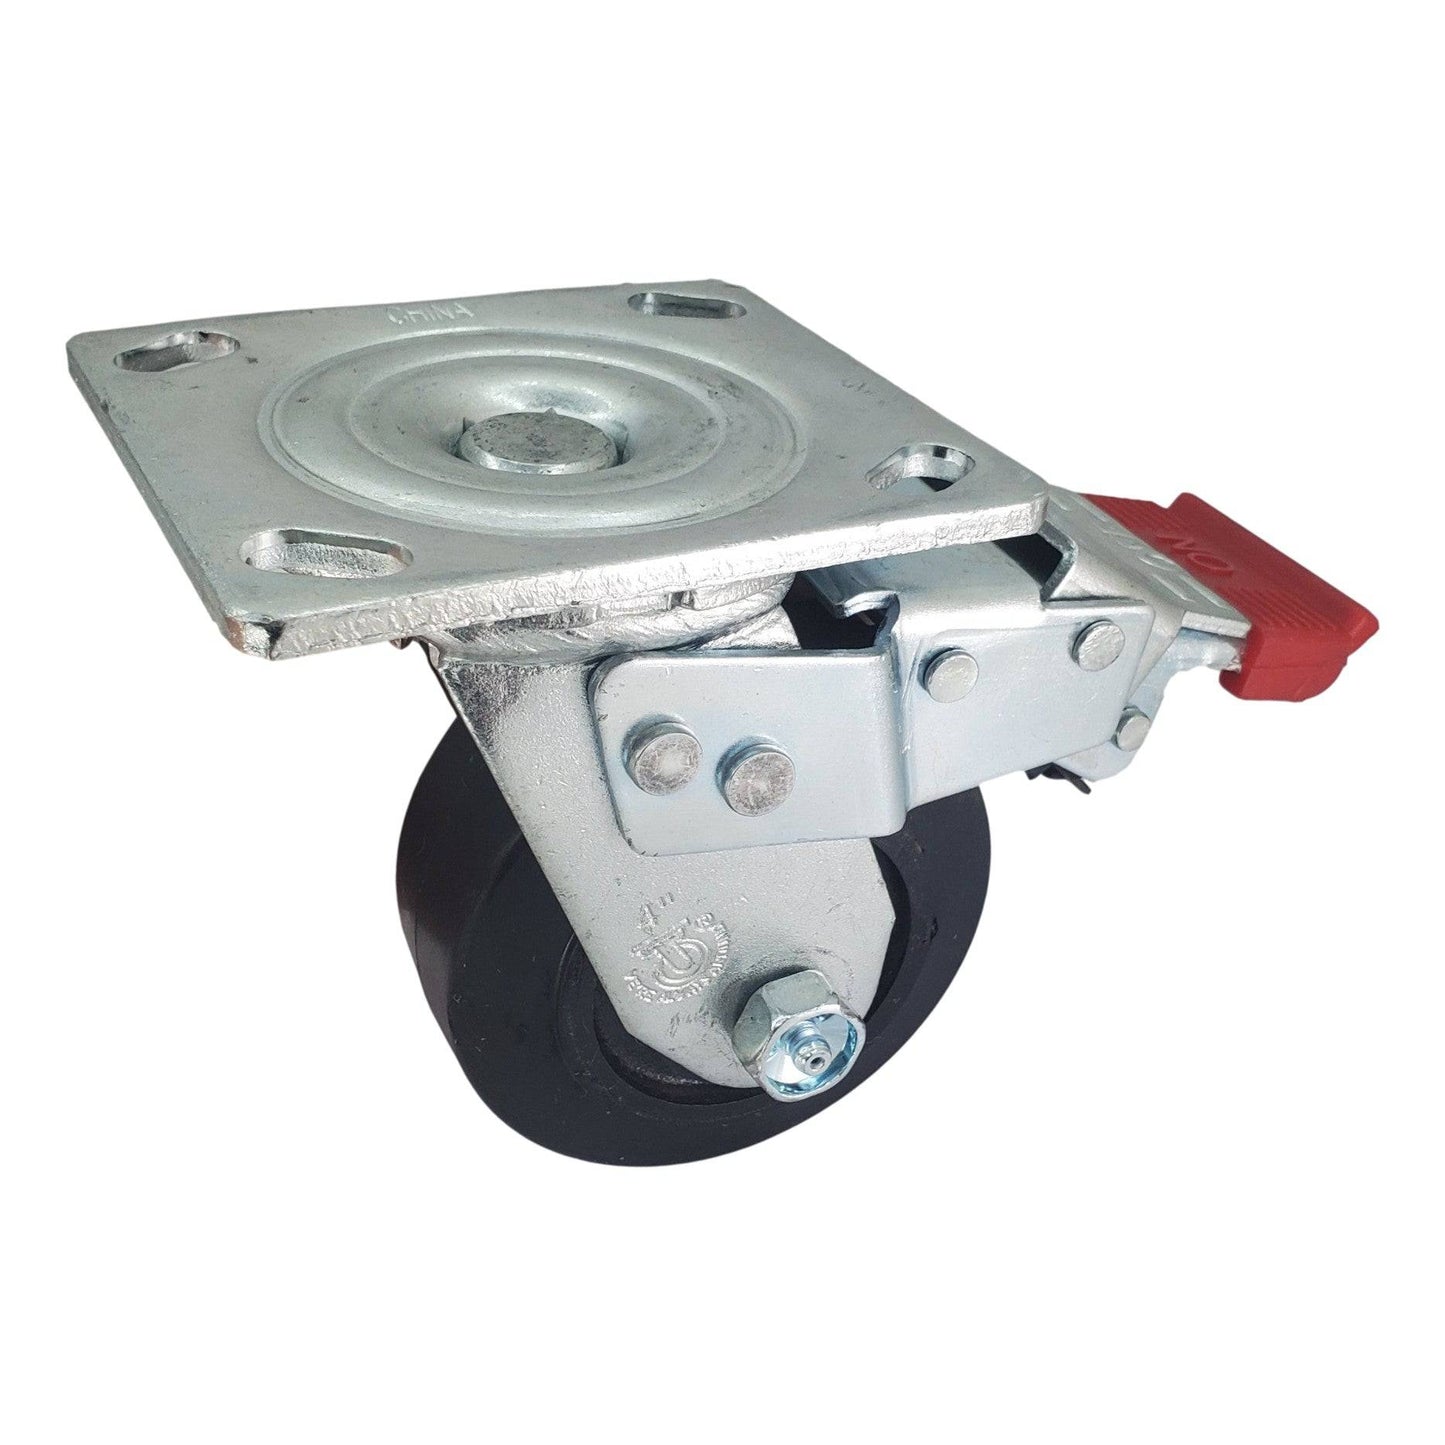 4" x 2" Mold-On Rubber Cast Swivel Caster w/ Total Lock Brake - 400 lbs. Cap. - Durable Superior Casters